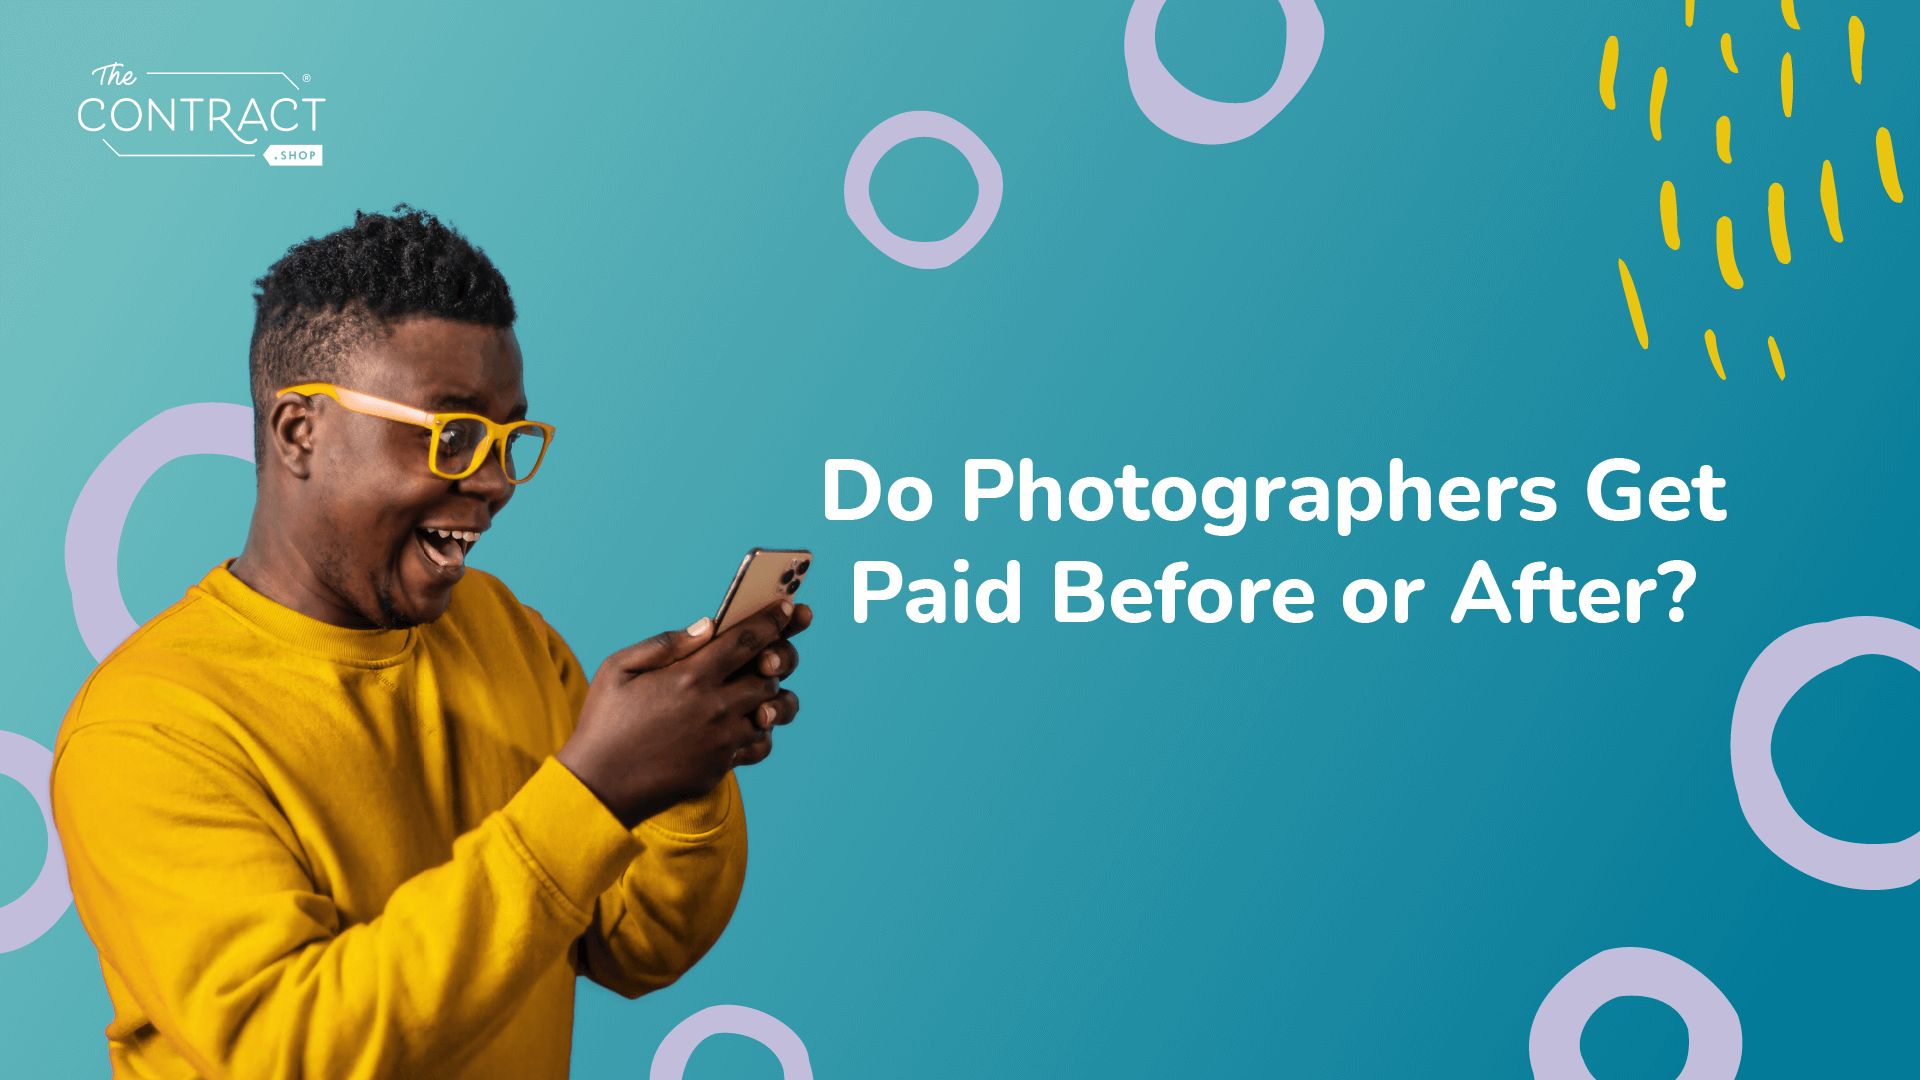 Do Photographers Get Paid Before or After?